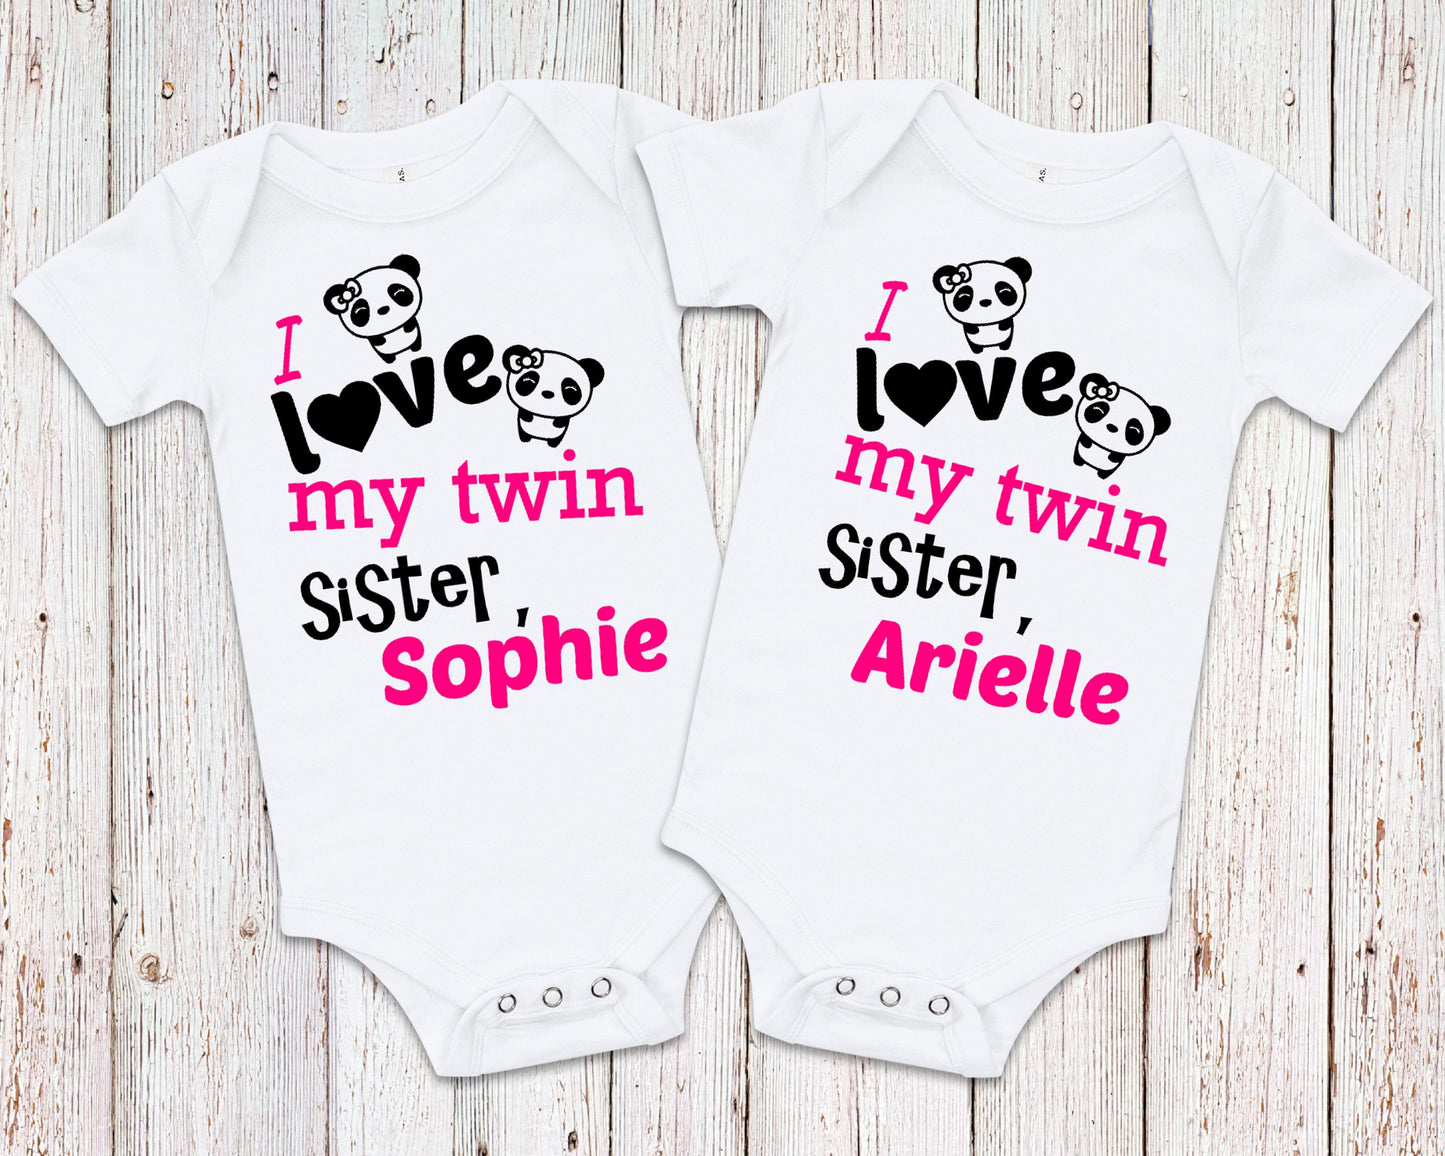 I Love My Twin Sister Twins T-Shirts or Bodysuits for Twin Girls - Identical Twins - Fraternal Twins - Sister Tees - girl twin tees